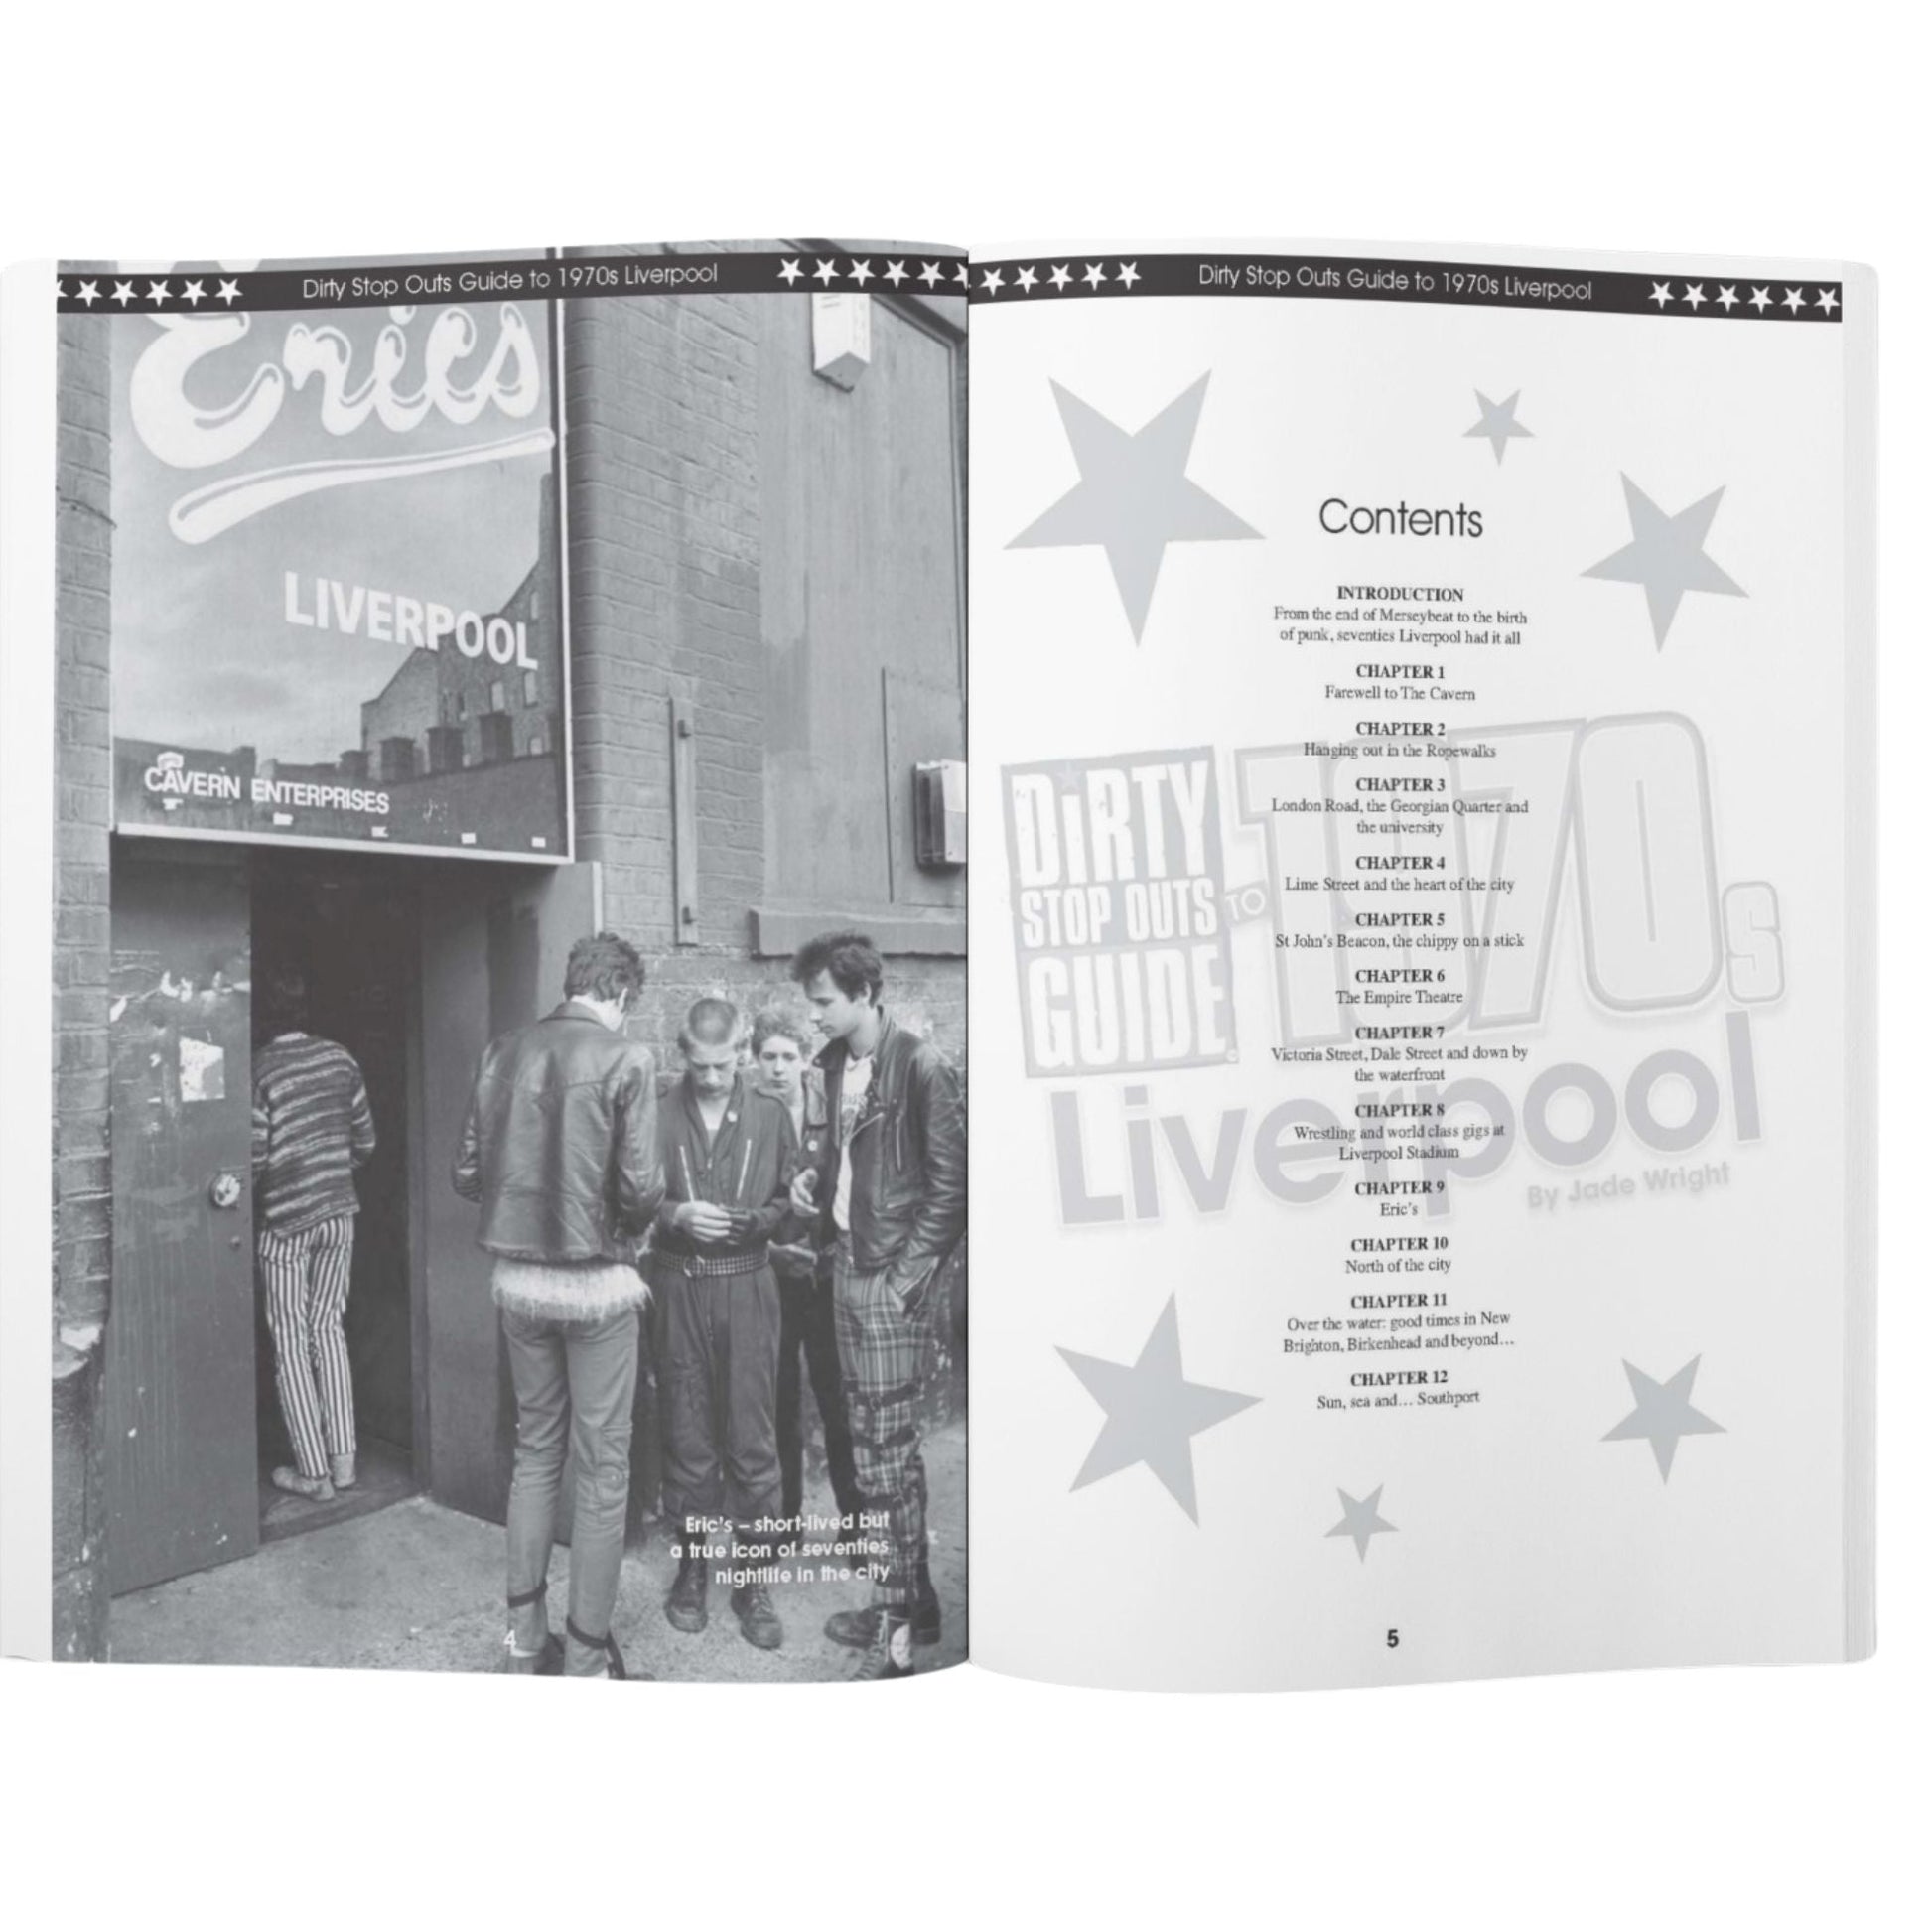 Dirty Stop Out's Guide to 1970s Liverpool - extended collector's edition - Dirty Stop Outs